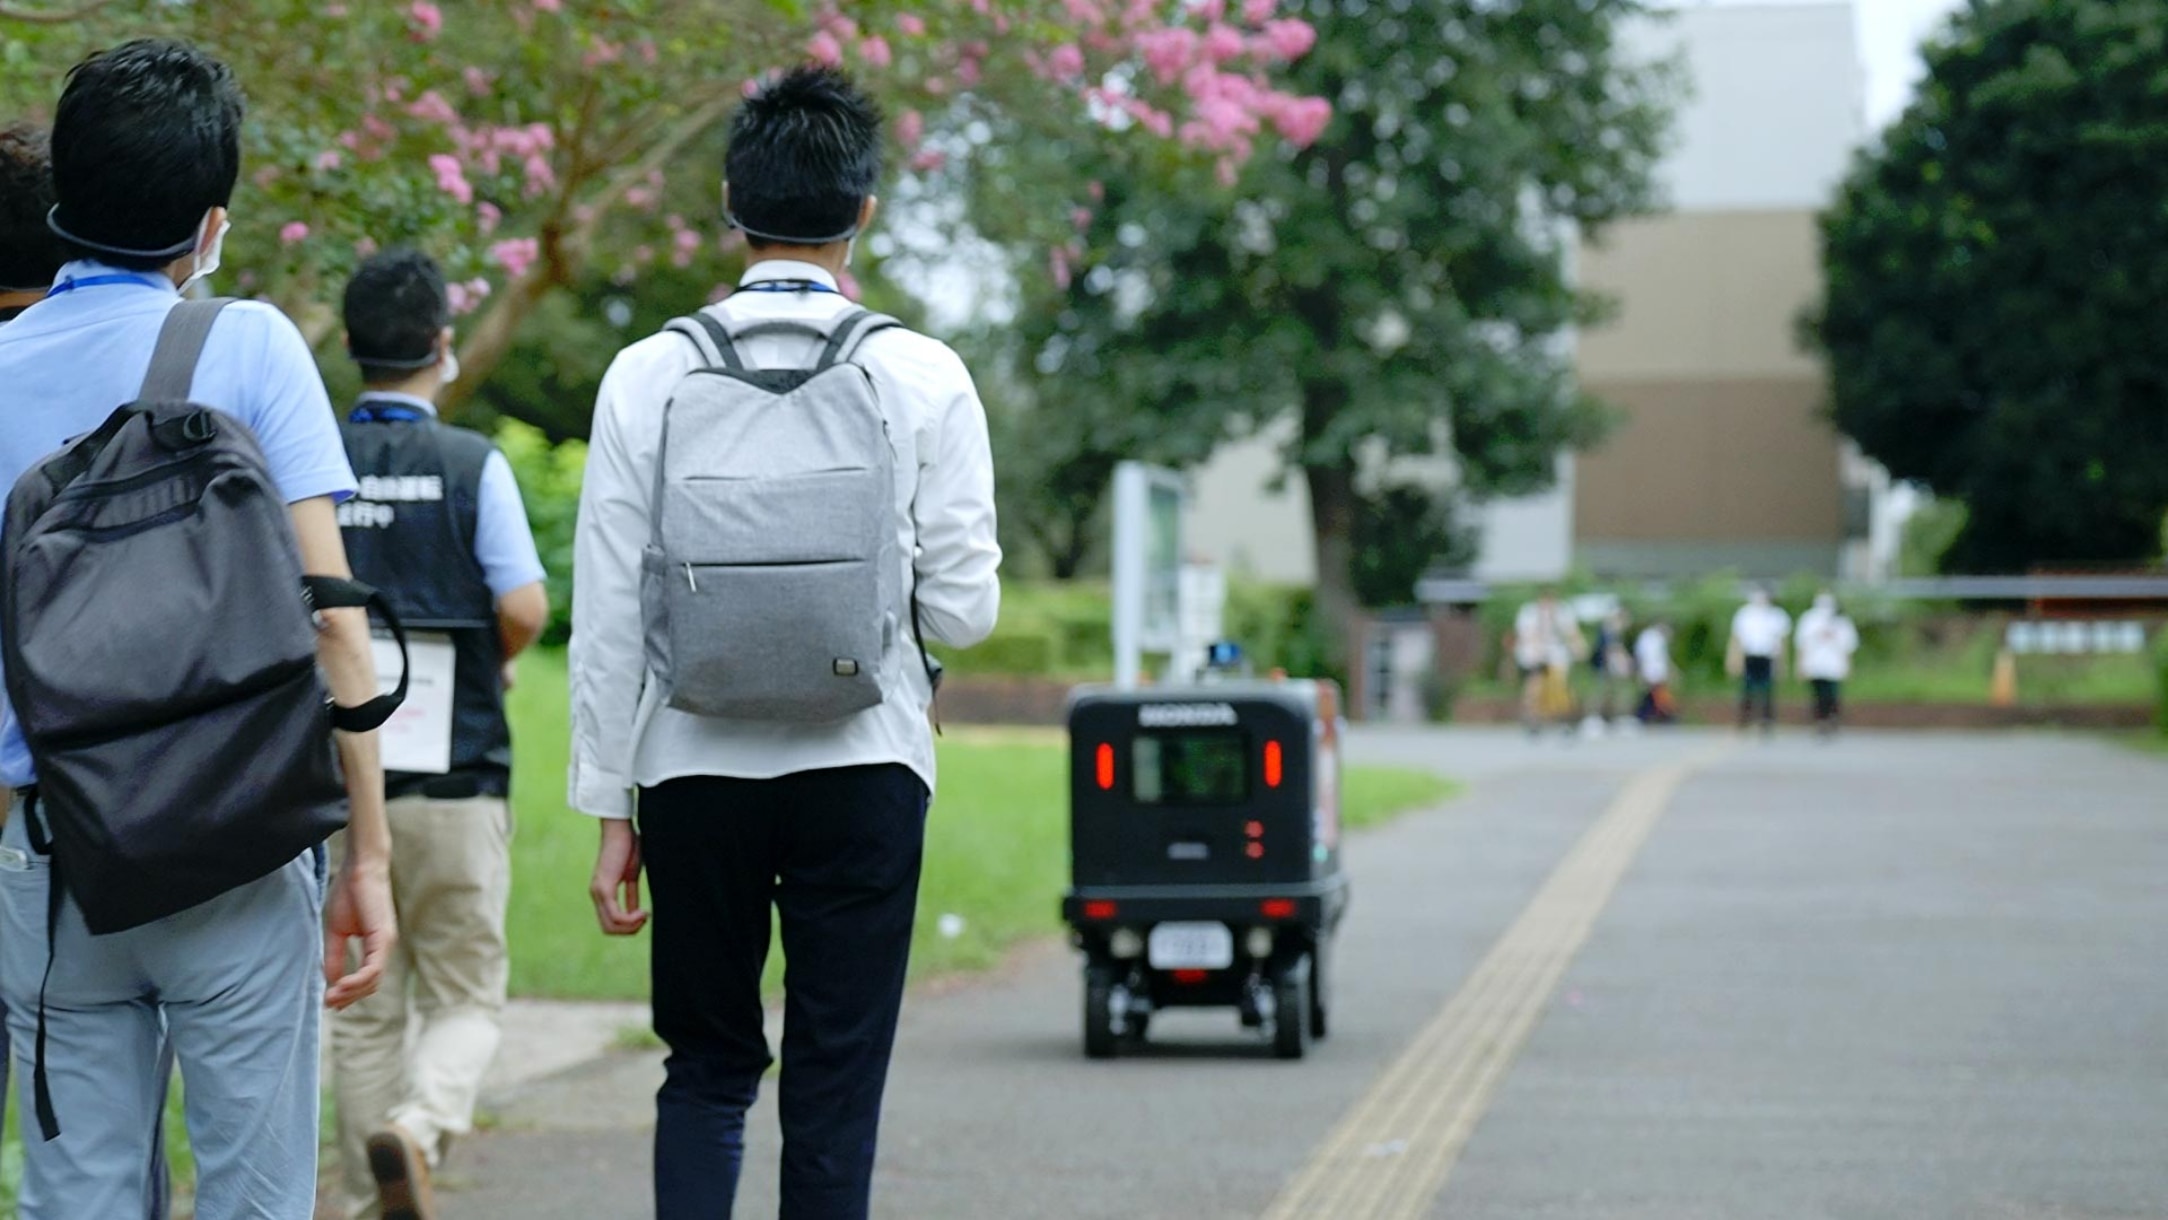 Robots face many different situations involving pedestrians and cyclists passing around them.